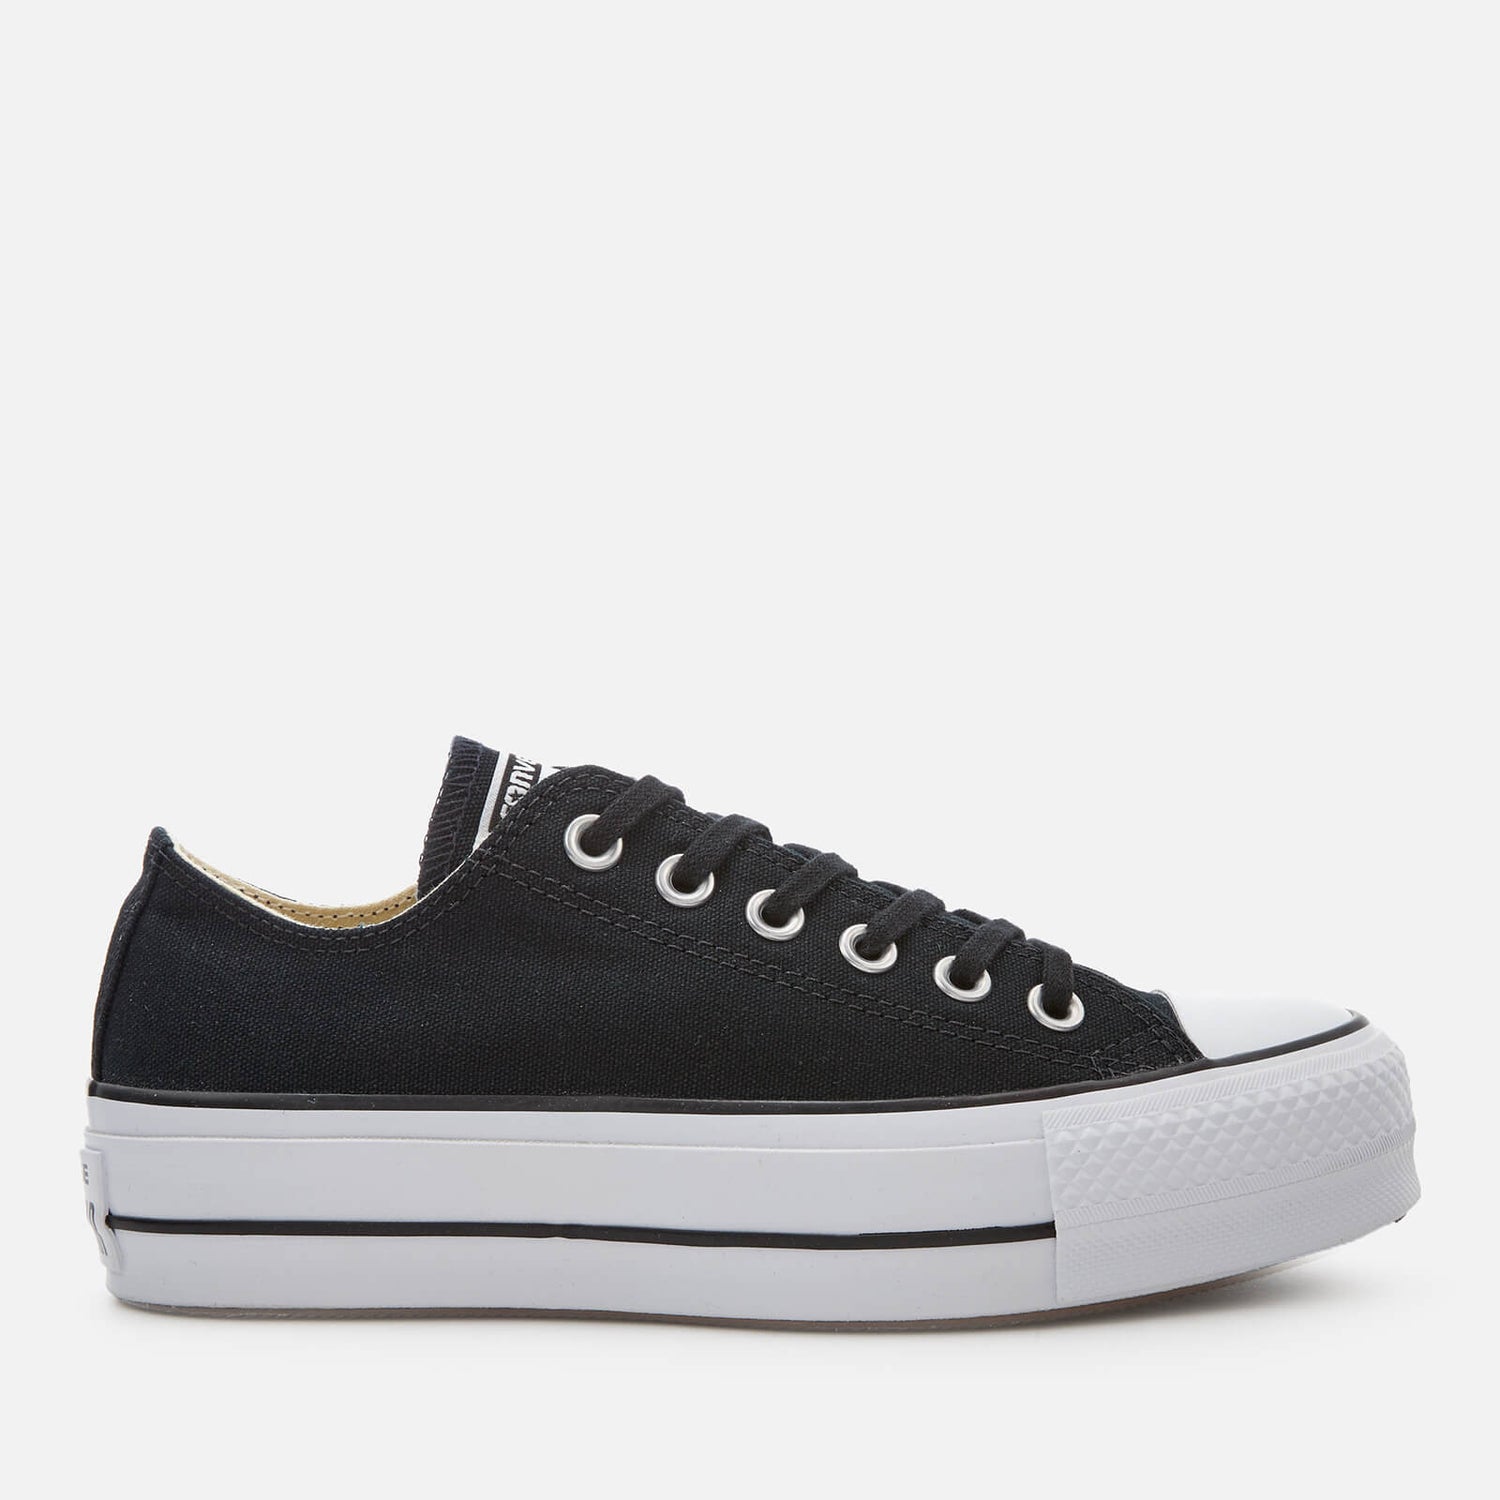 Converse Women's Chuck Taylor All Star Lift Ox Trainers - Black/White/White - UK 3